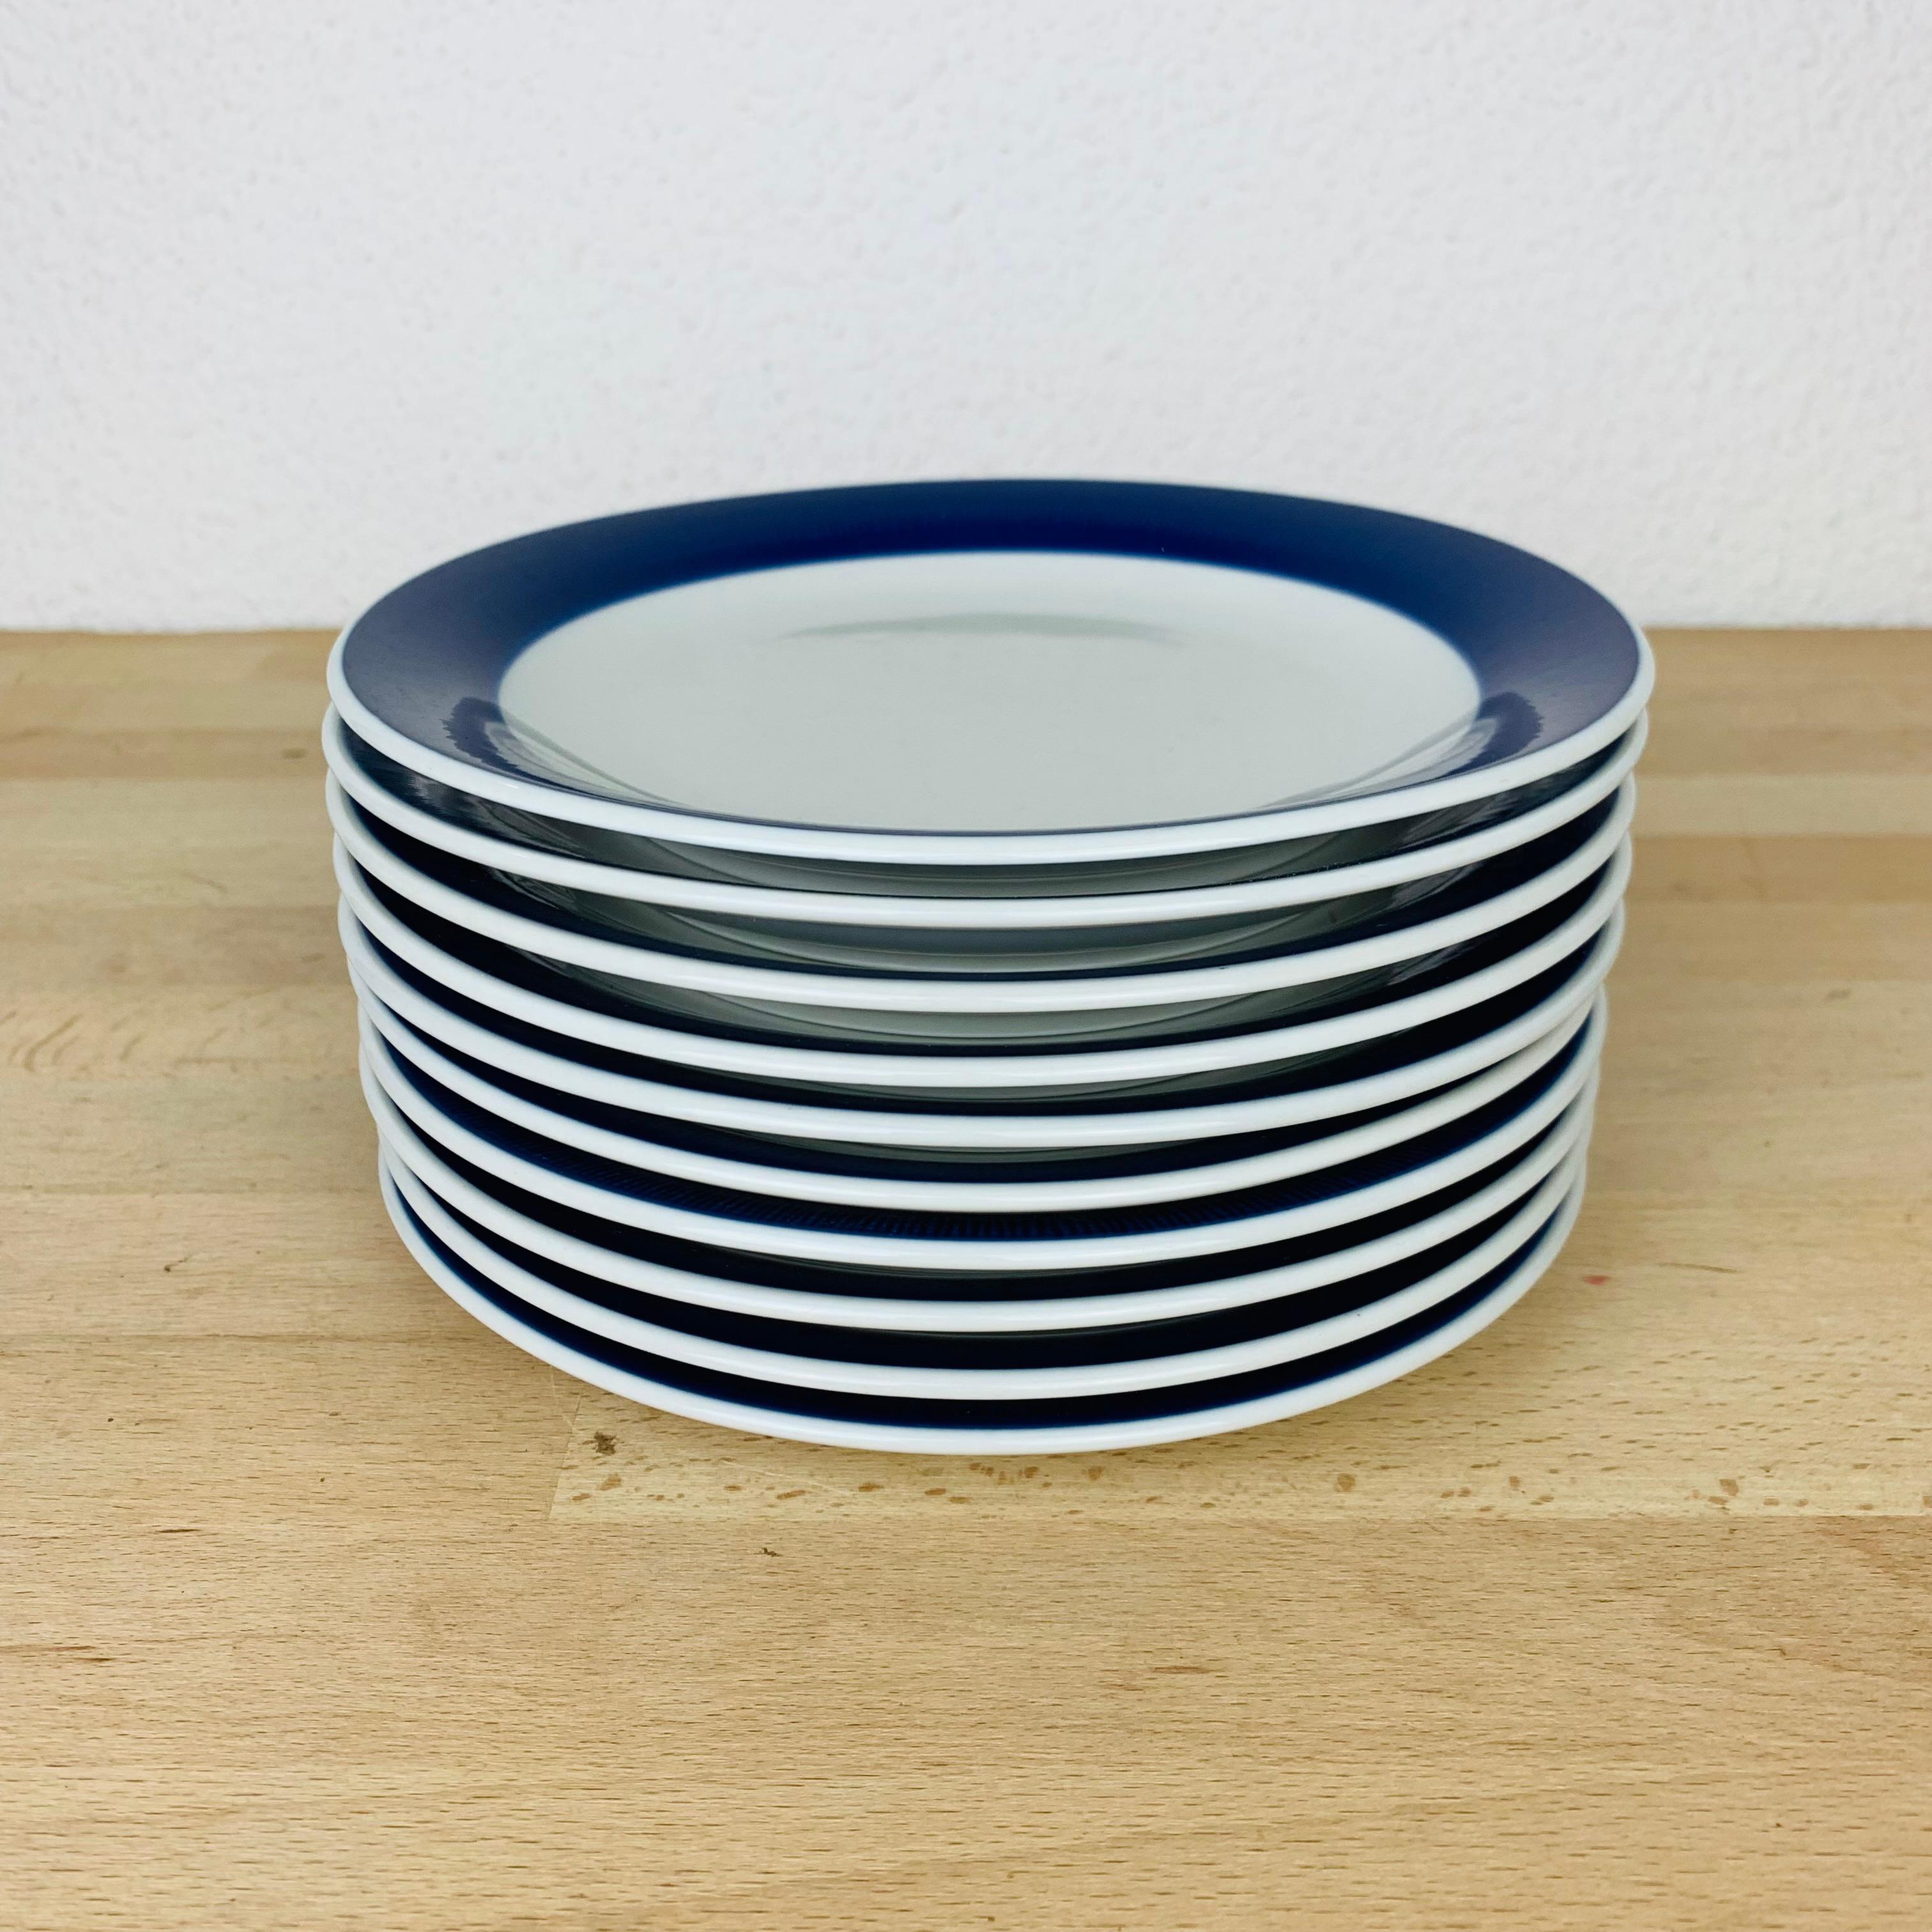 Set of ten Koka dessert/cake plates by Hertha Bengtson for Rörstrand Sweden, manufactured in the 1960's.

Slight wear due to its age and use, no chip, no crack. 

Measurements : diameter 19 cm, height 2 cm. 